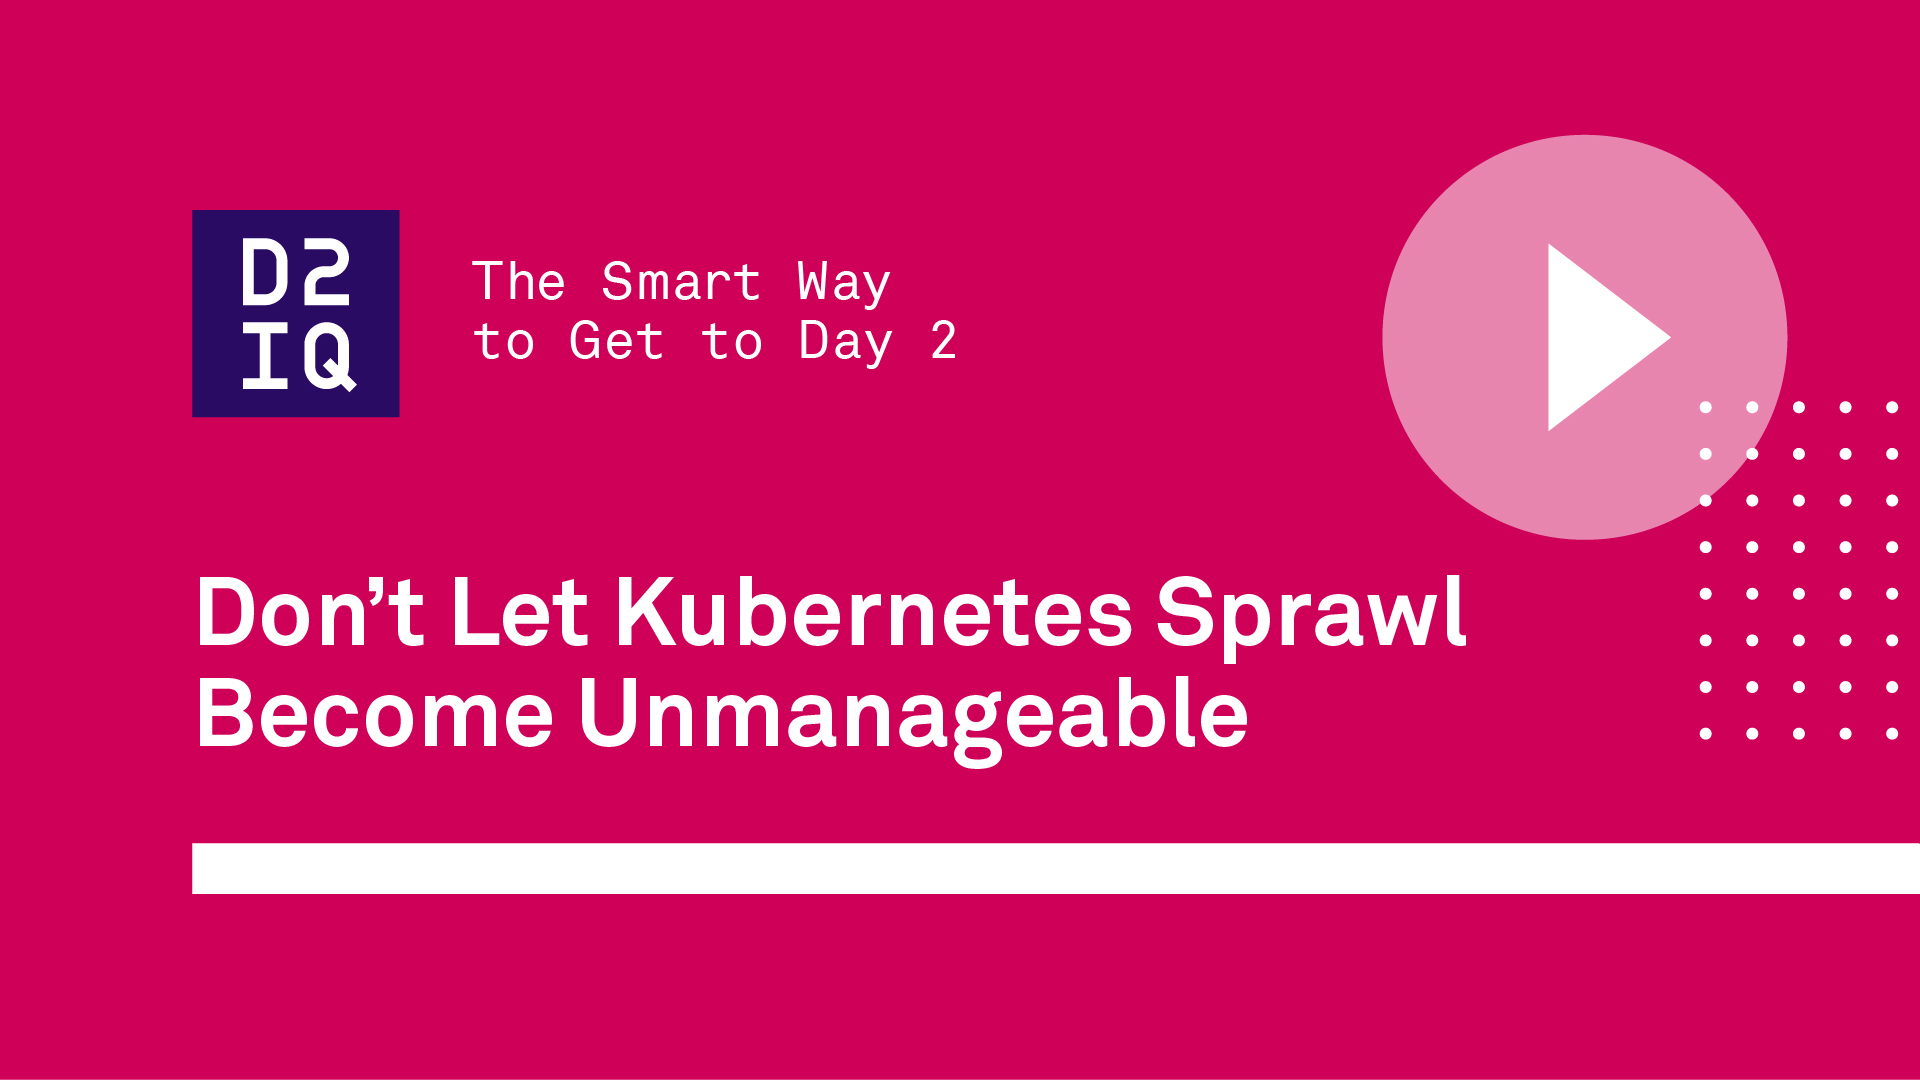 Don't Let Kubernetes Sprawl Become Unmanageable